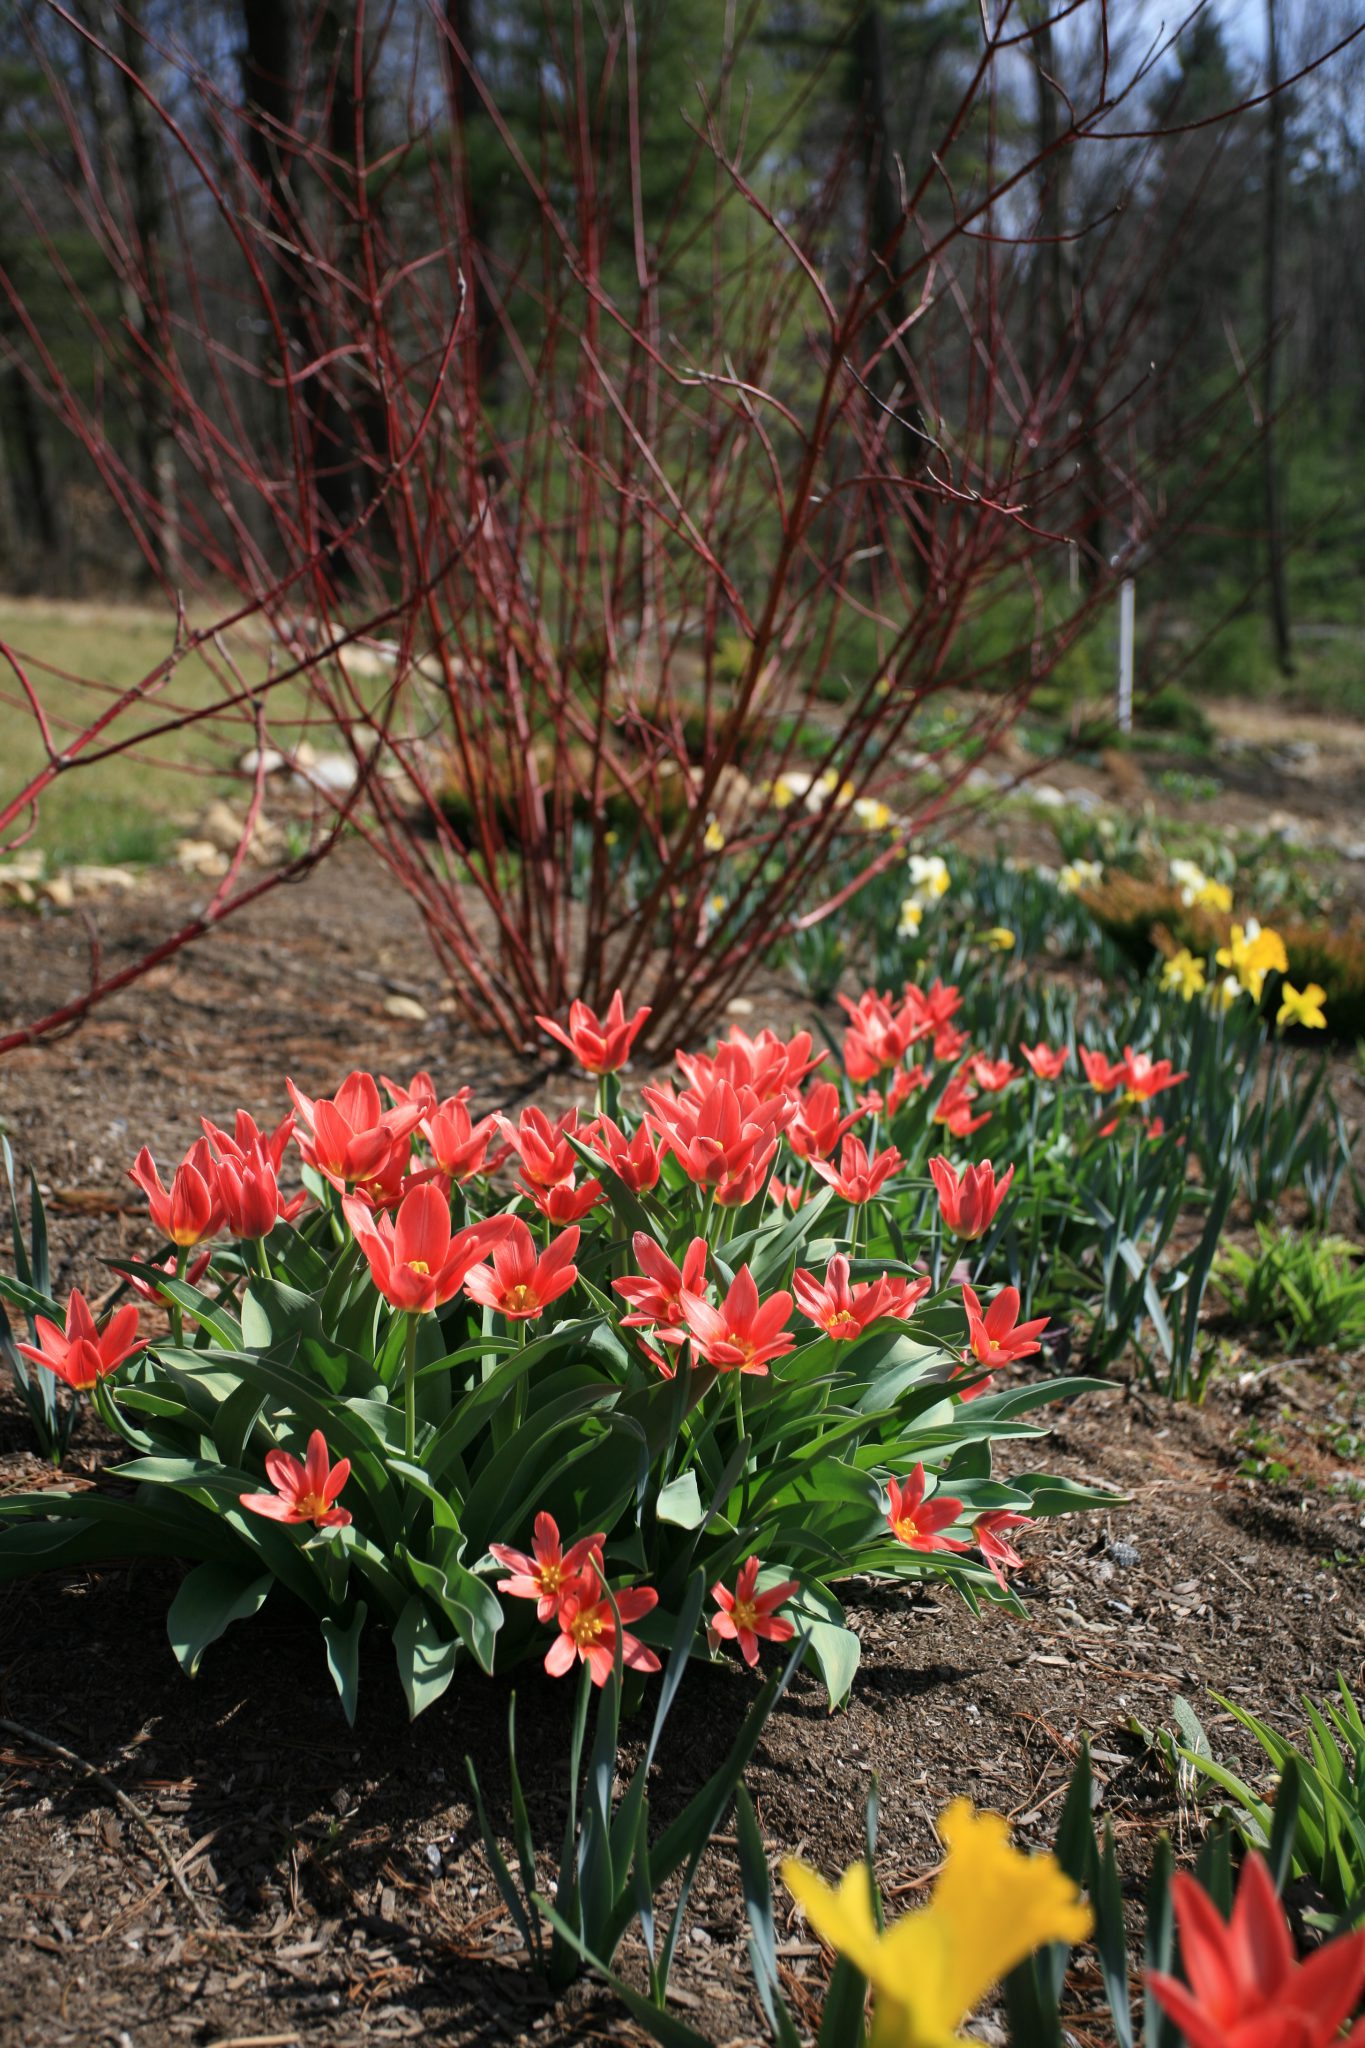 Red species Tulips and Red-Twigged Dogwood